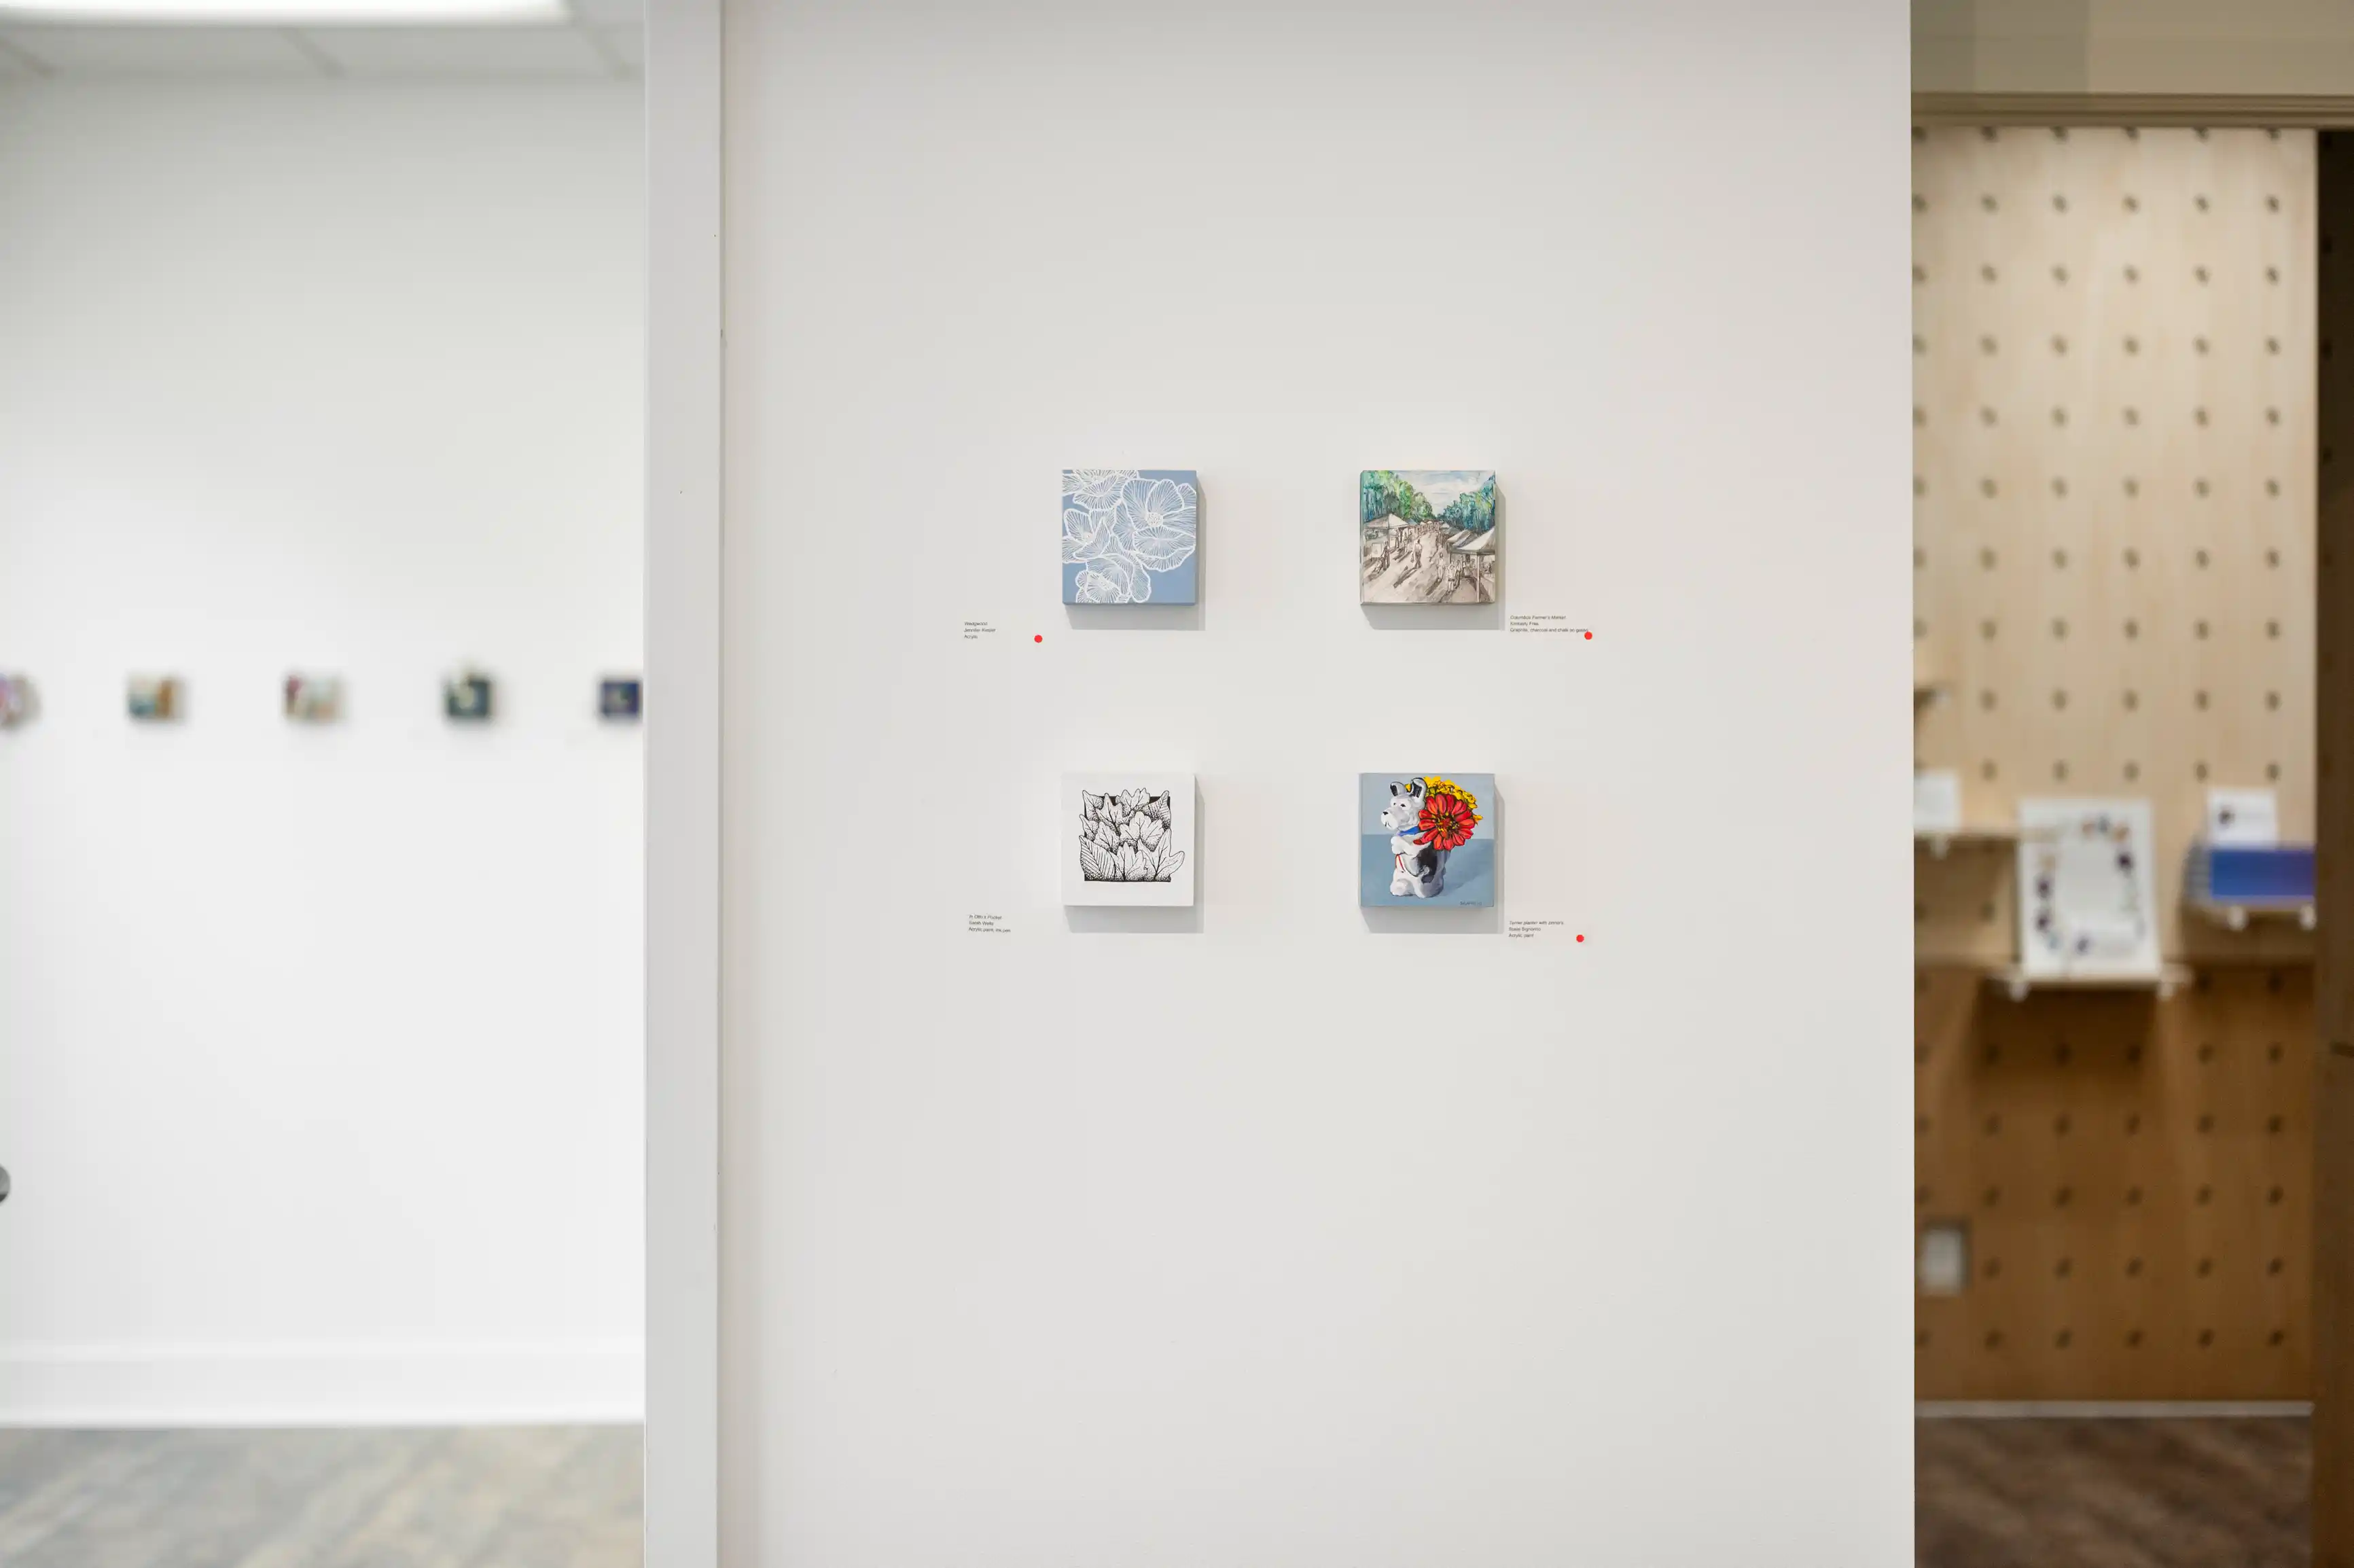 Art gallery interior with four small paintings displayed on a white wall, each accompanied by a descriptive label, and shelves with art materials in the background to the right.